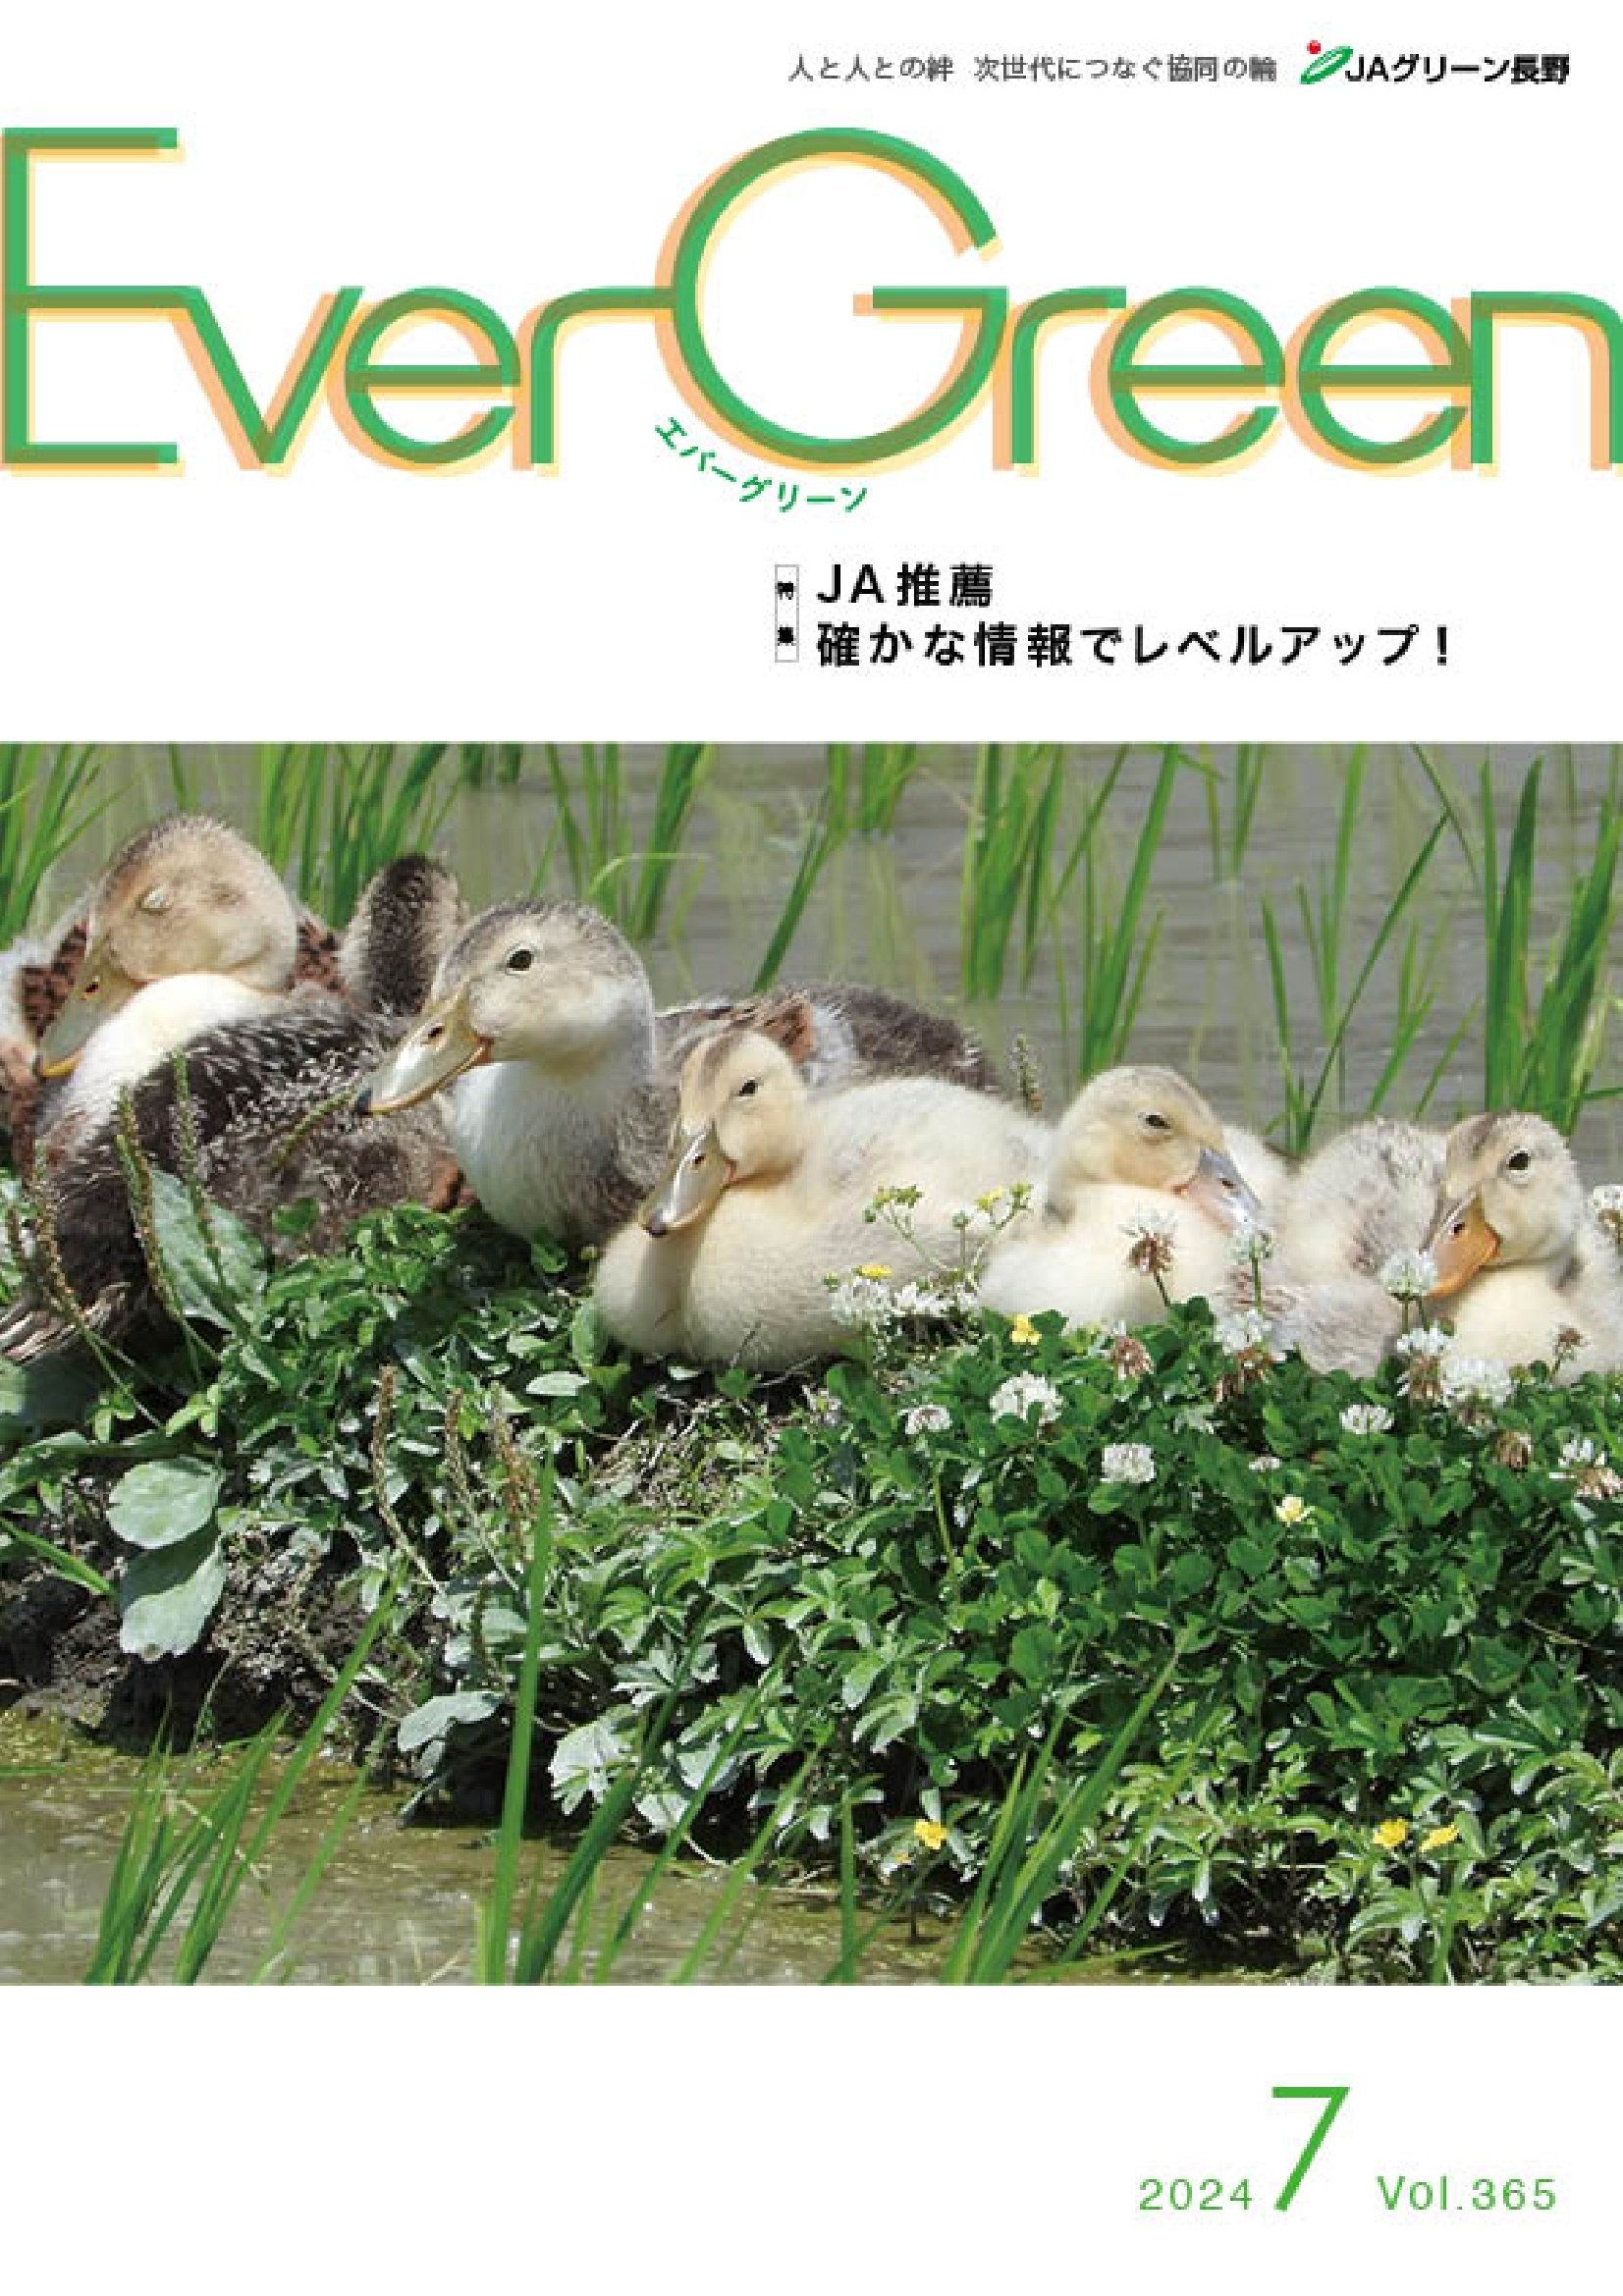 Ever Green7月号発行のご案内